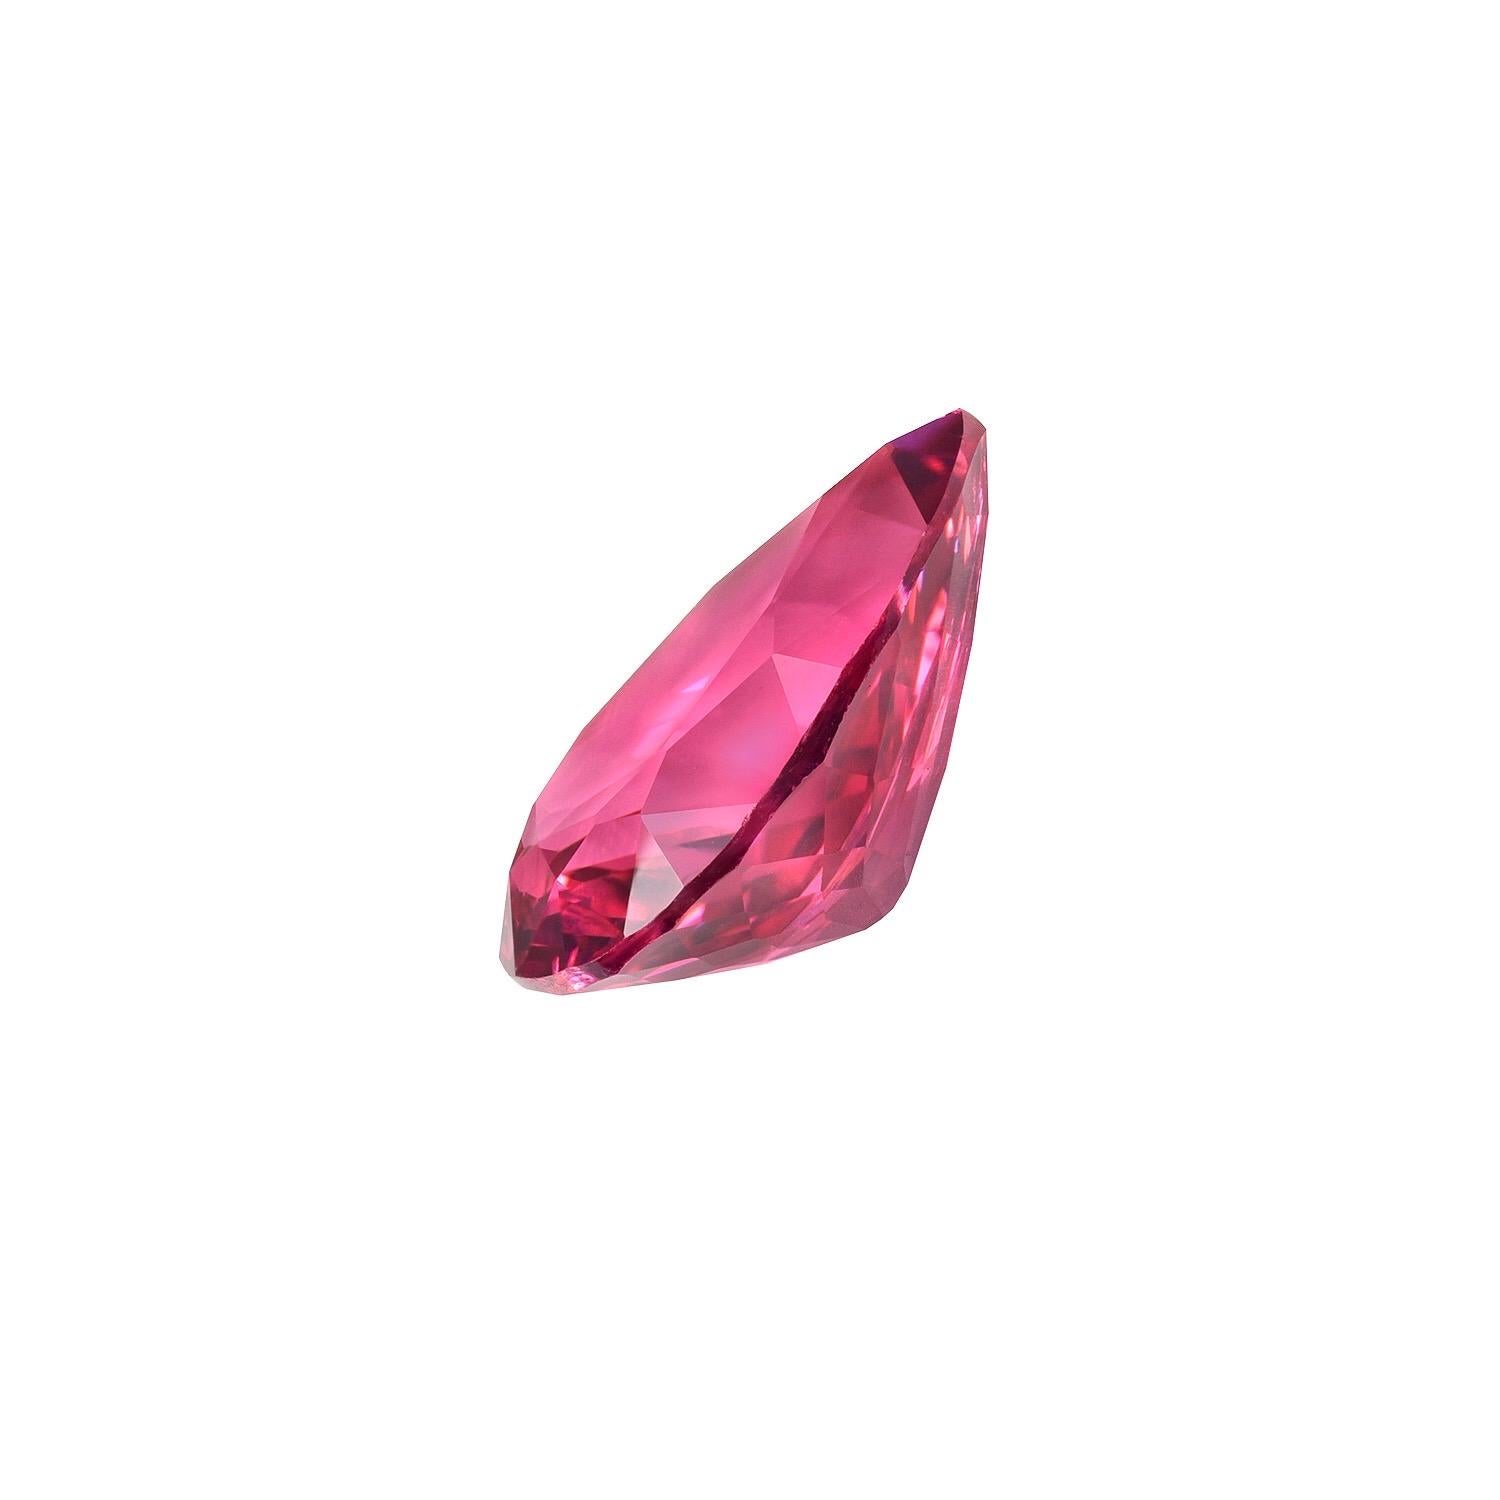 Special 2.08 carat Pink Spinel pear shape gem, from Mahenge Tanzania, offered loose to a world-class gemstone lover.
Returns are accepted and paid by us within 7 days of delivery.
We offer supreme custom jewelry work upon request. Please contact us